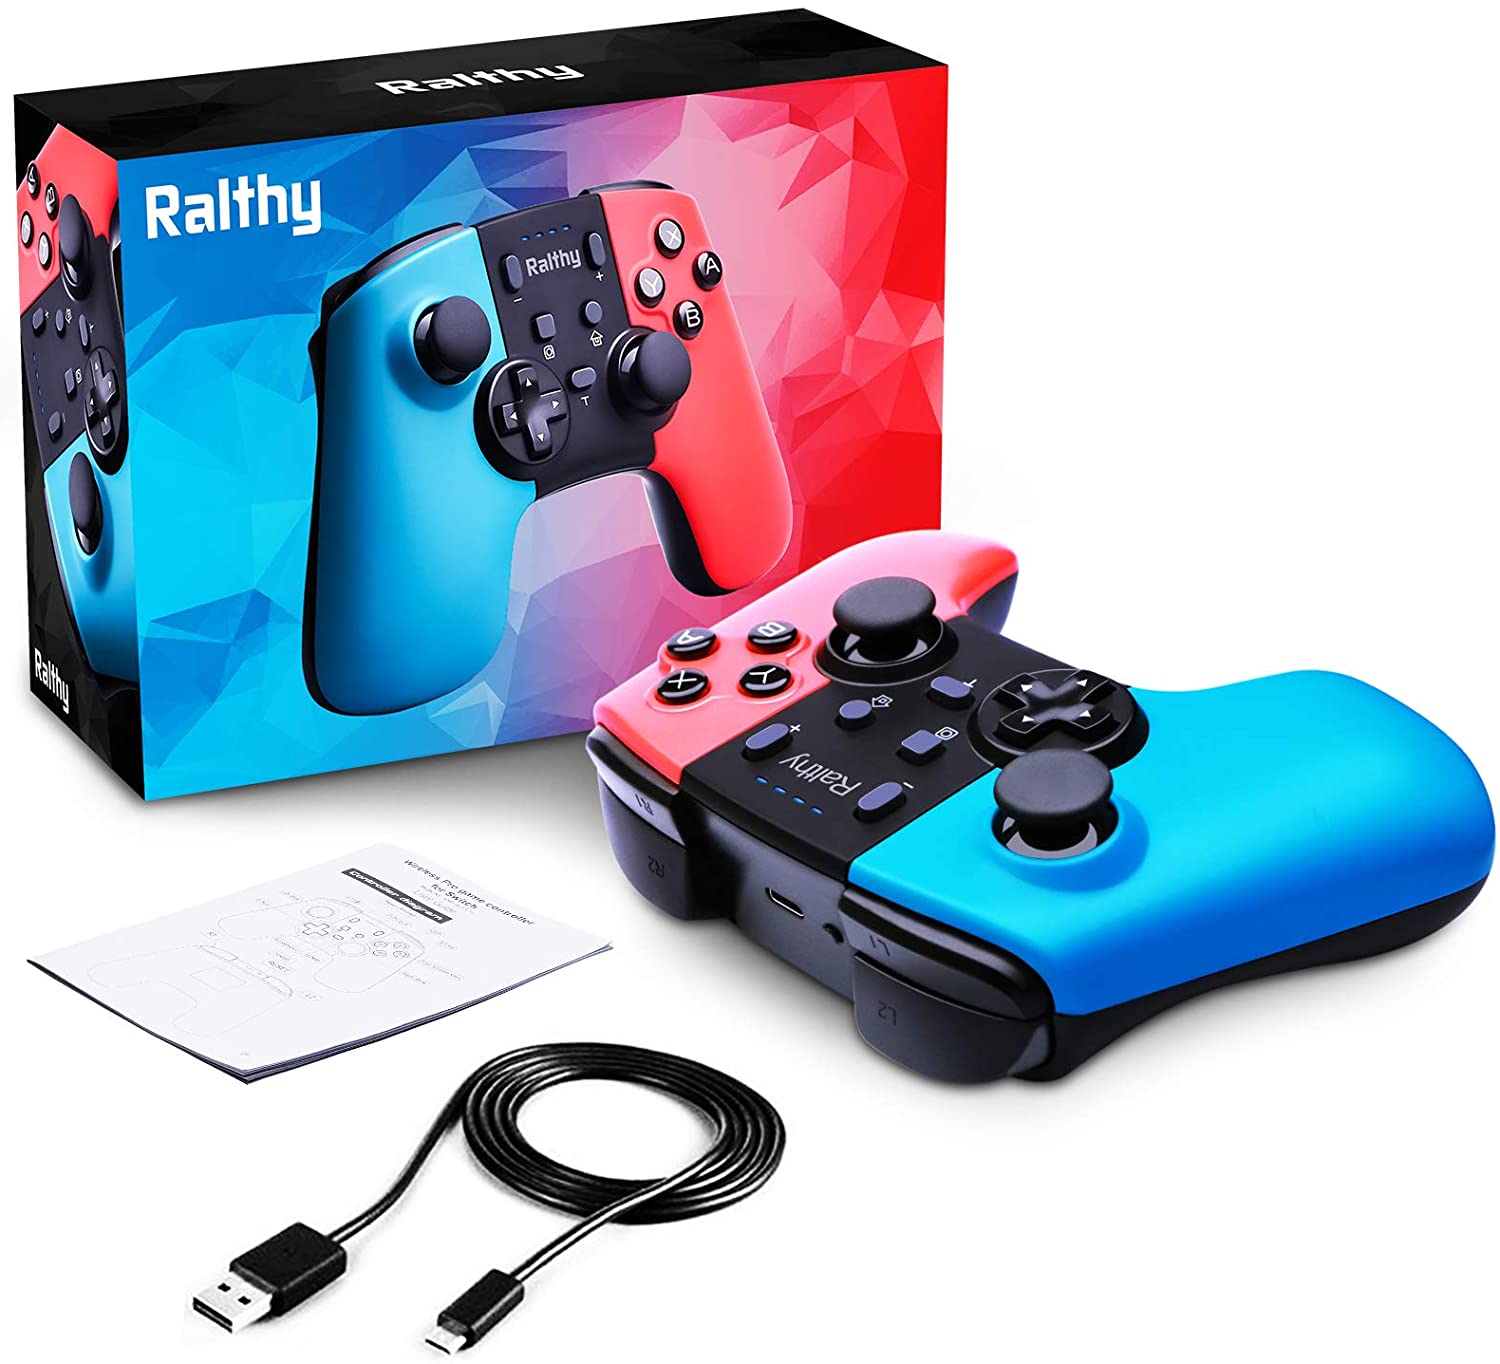 42% off Ralthy Wireless Pro Controller